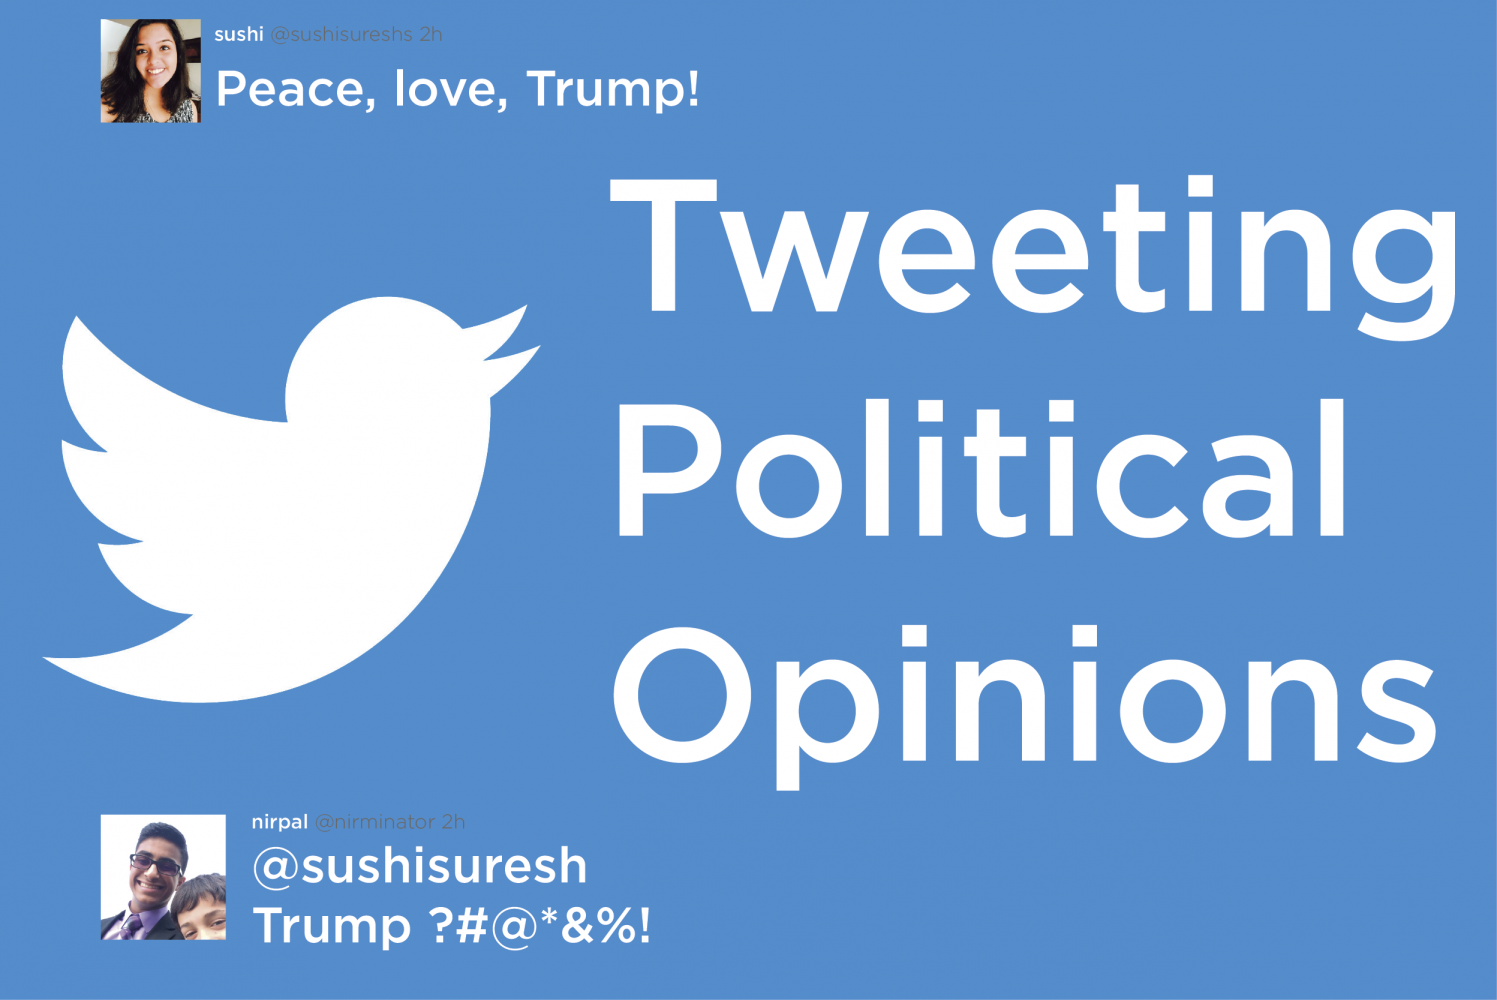 Is tweeting the appropriate way to talk politics?